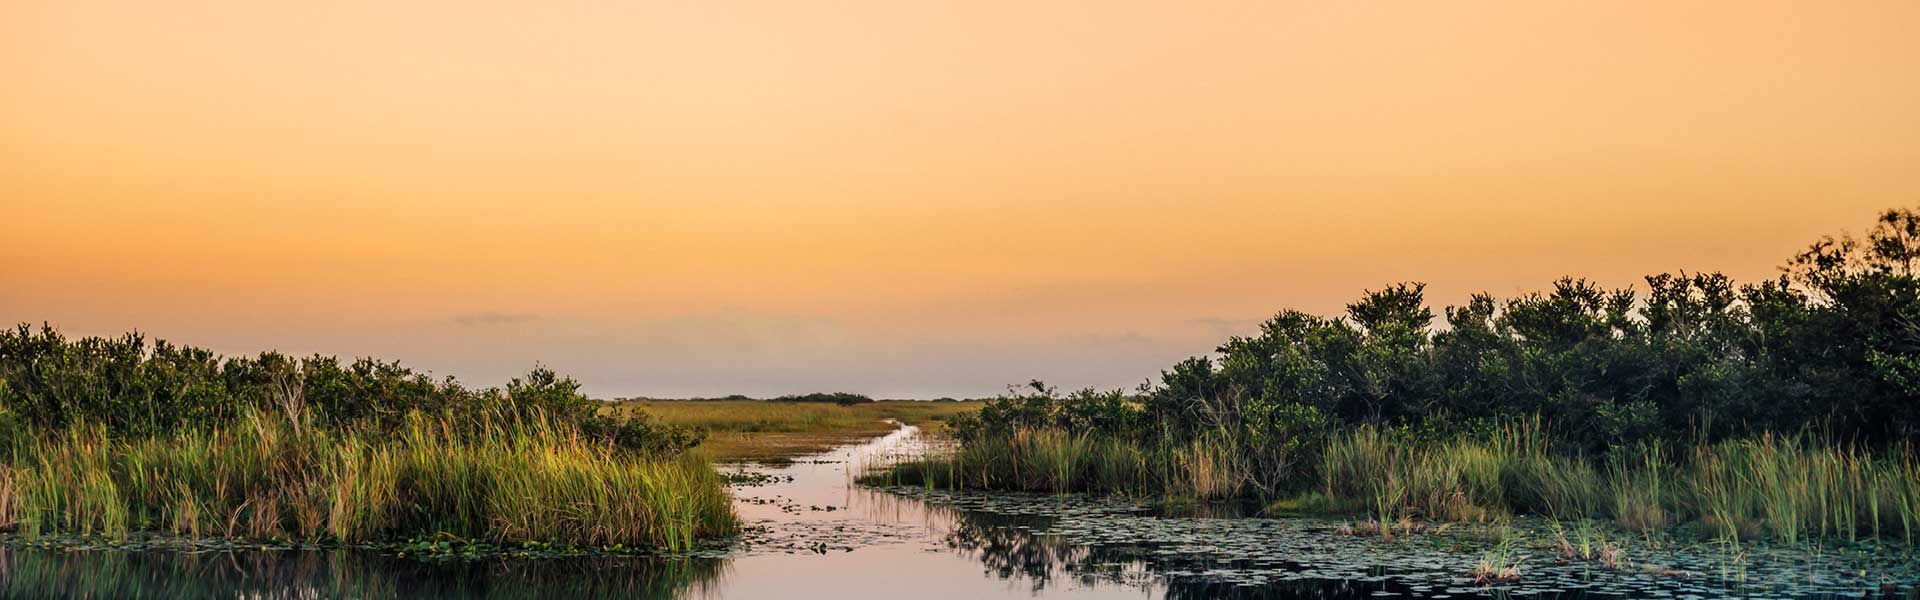 Everglades Sunset Miami Campaign Page Banner 01Sep22